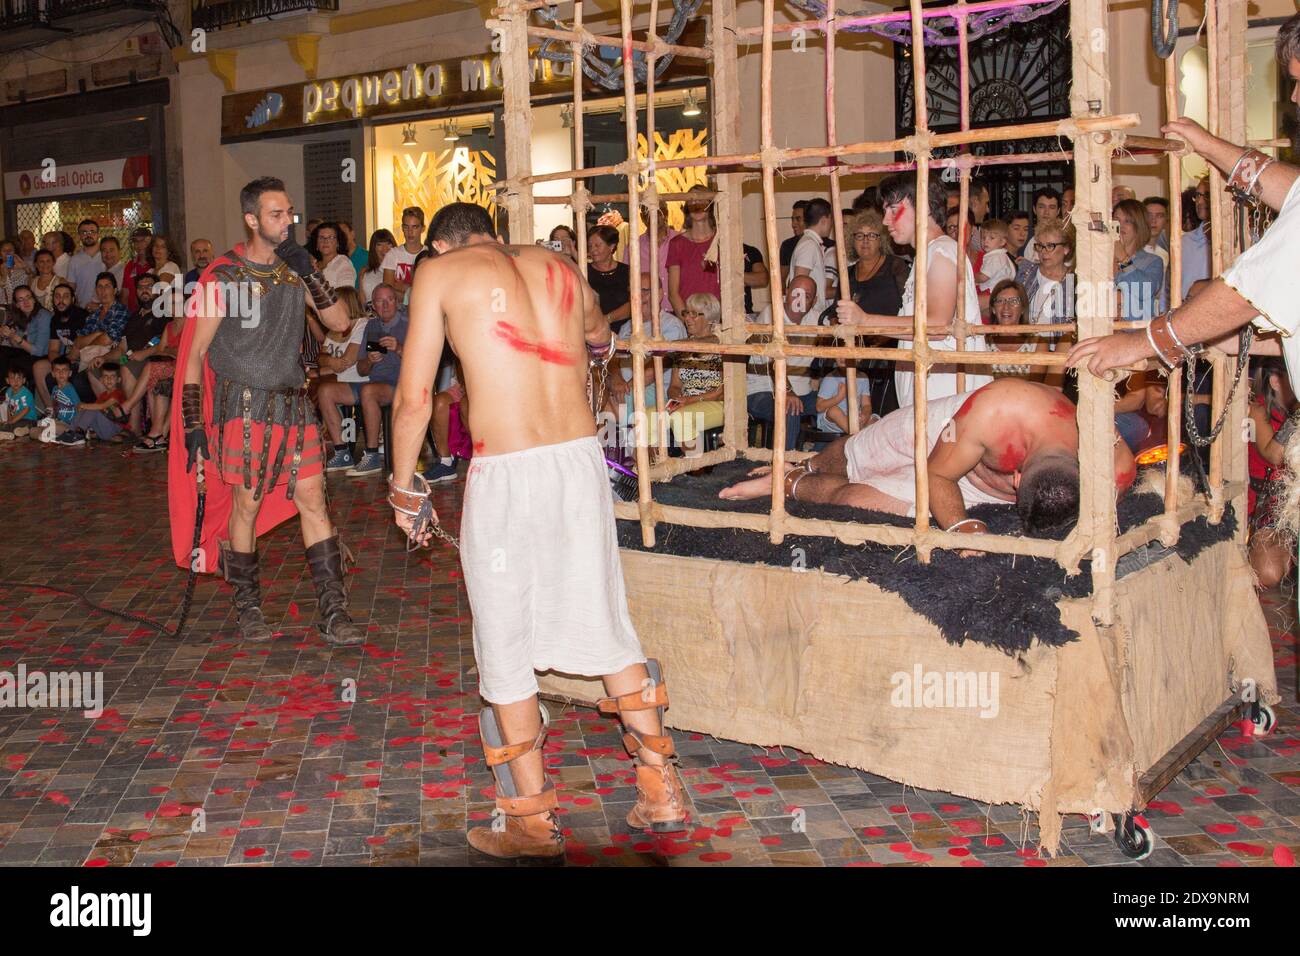 An annual festival in Cartagena, Spain is the Cartaginians and Romans. A triumphal procession by the Romans through the city streets. A caged prisoner Stock Photo